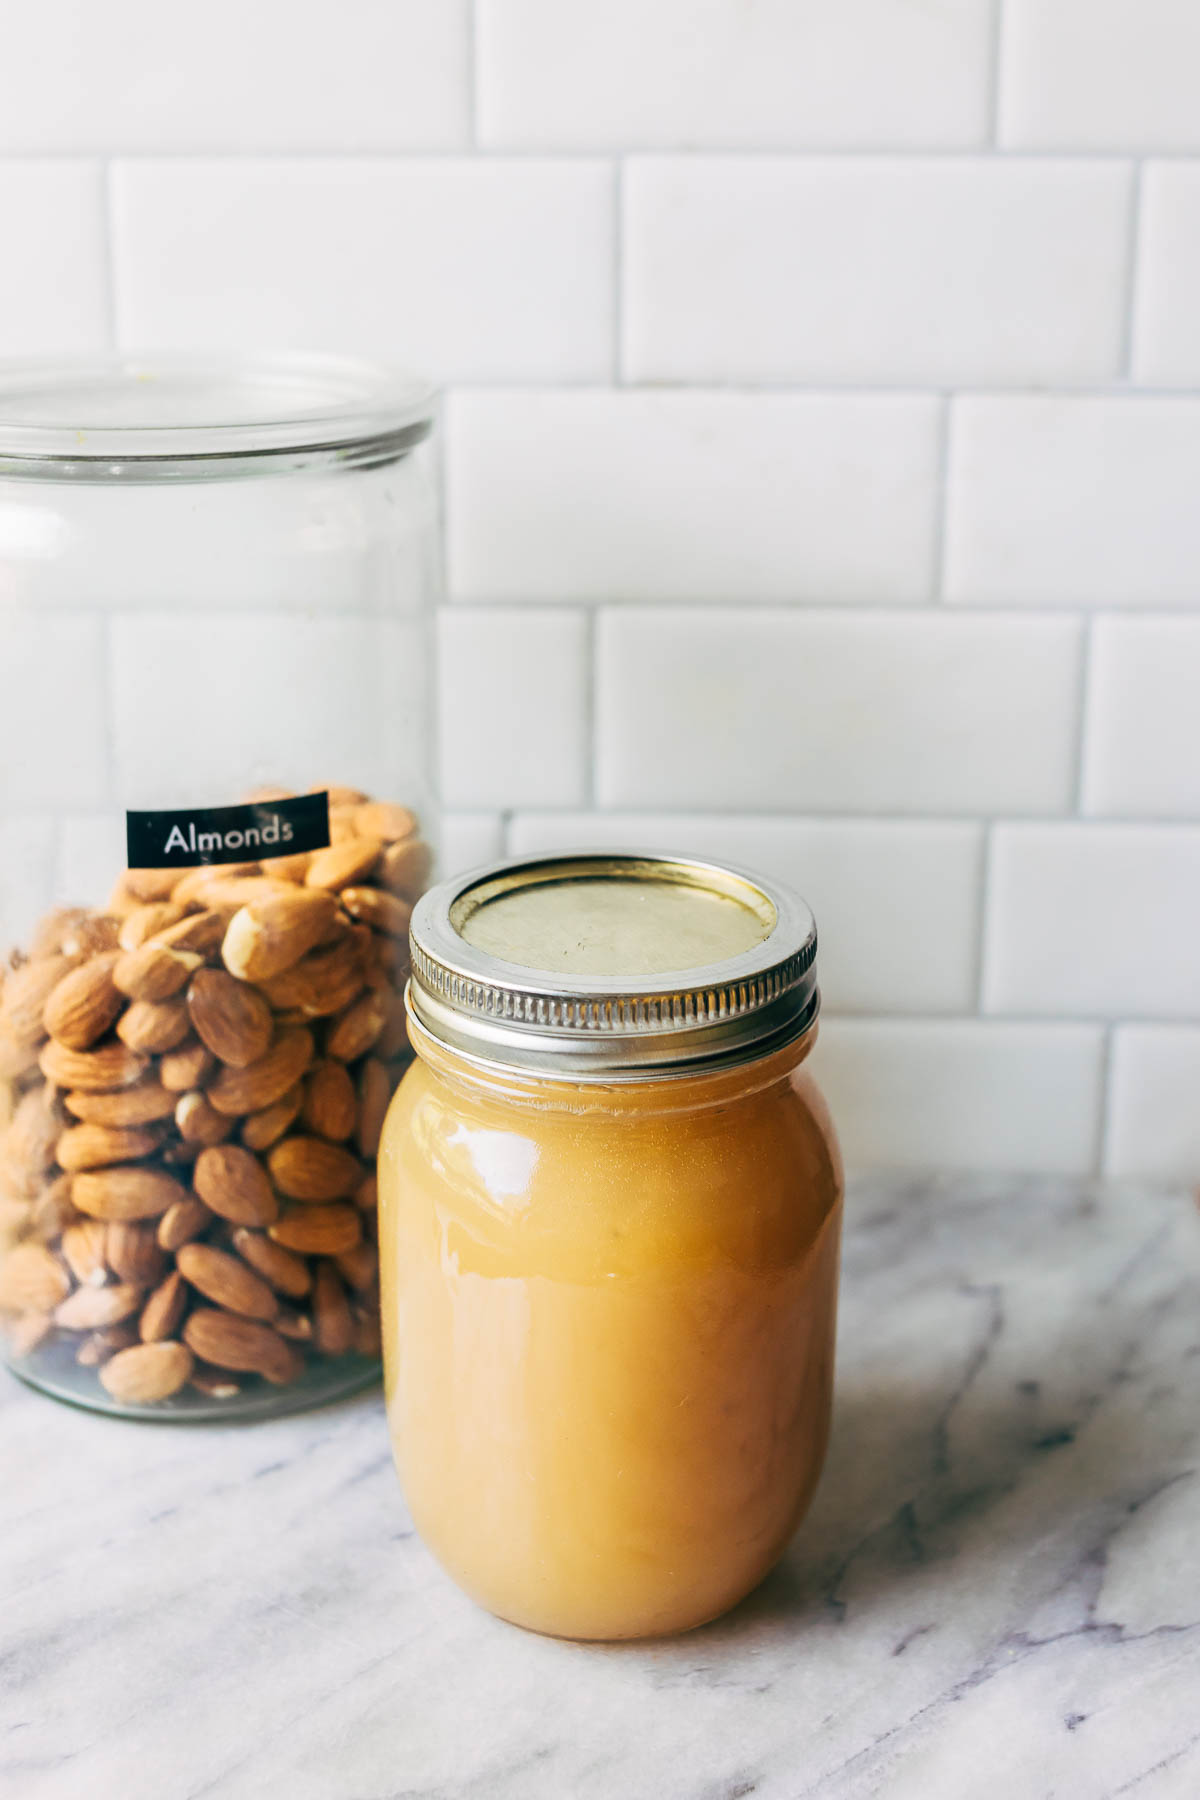 A jar of homemade orgeat syrup on a counter next to a glass canister half-filled with almonds.